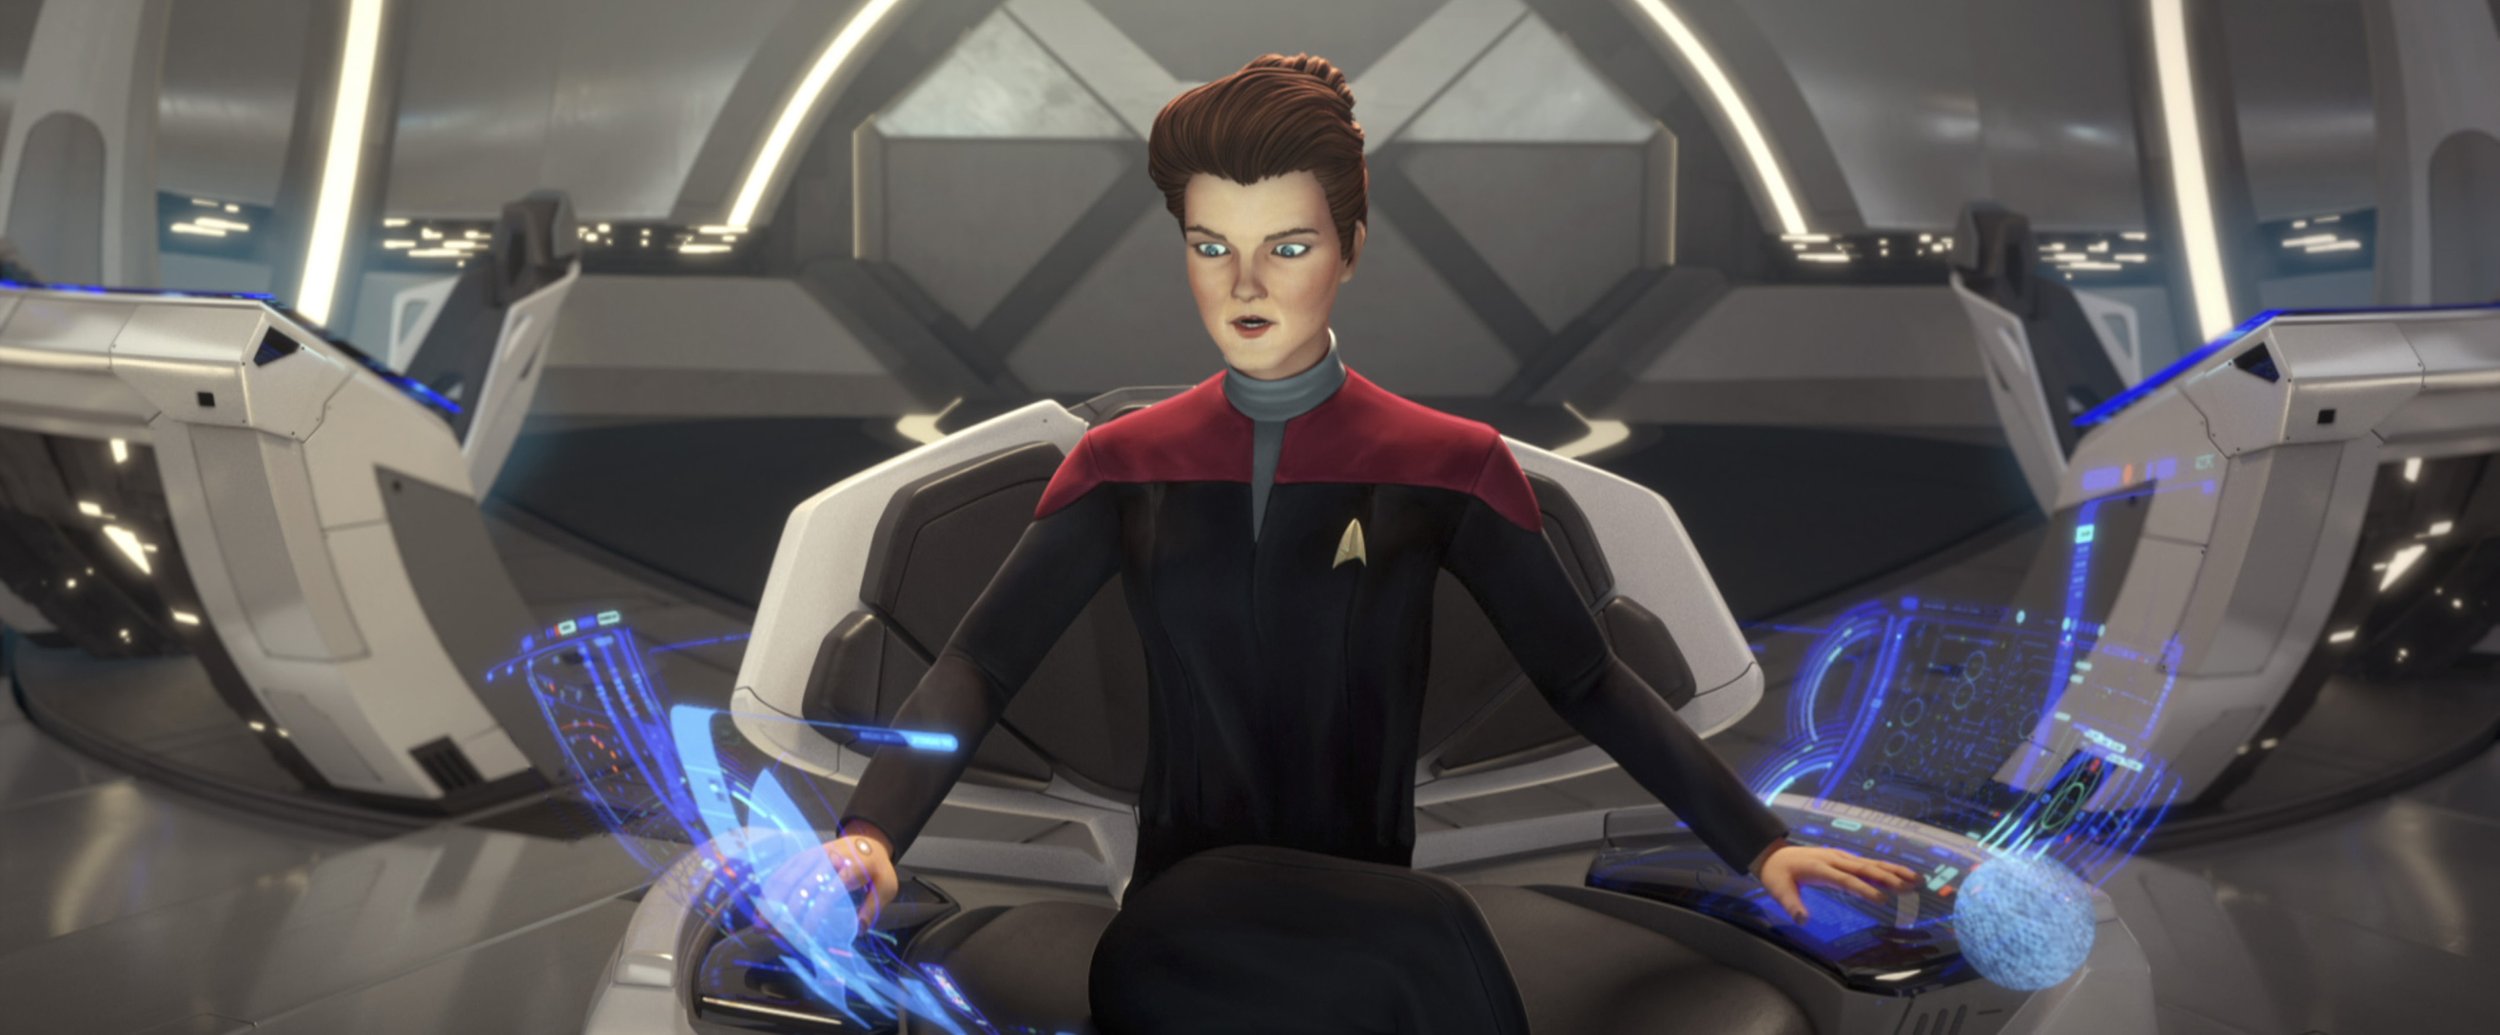   "Terror Firma" --EP#105 -- Kate Mulgrew as Janeway in Star Trek: Prodigy streaming on PARAMOUNT+. Photo: Nickelodeon/Paramount+ ©2021 VIACOM INTERNATIONAL. All Rights Reserved.  